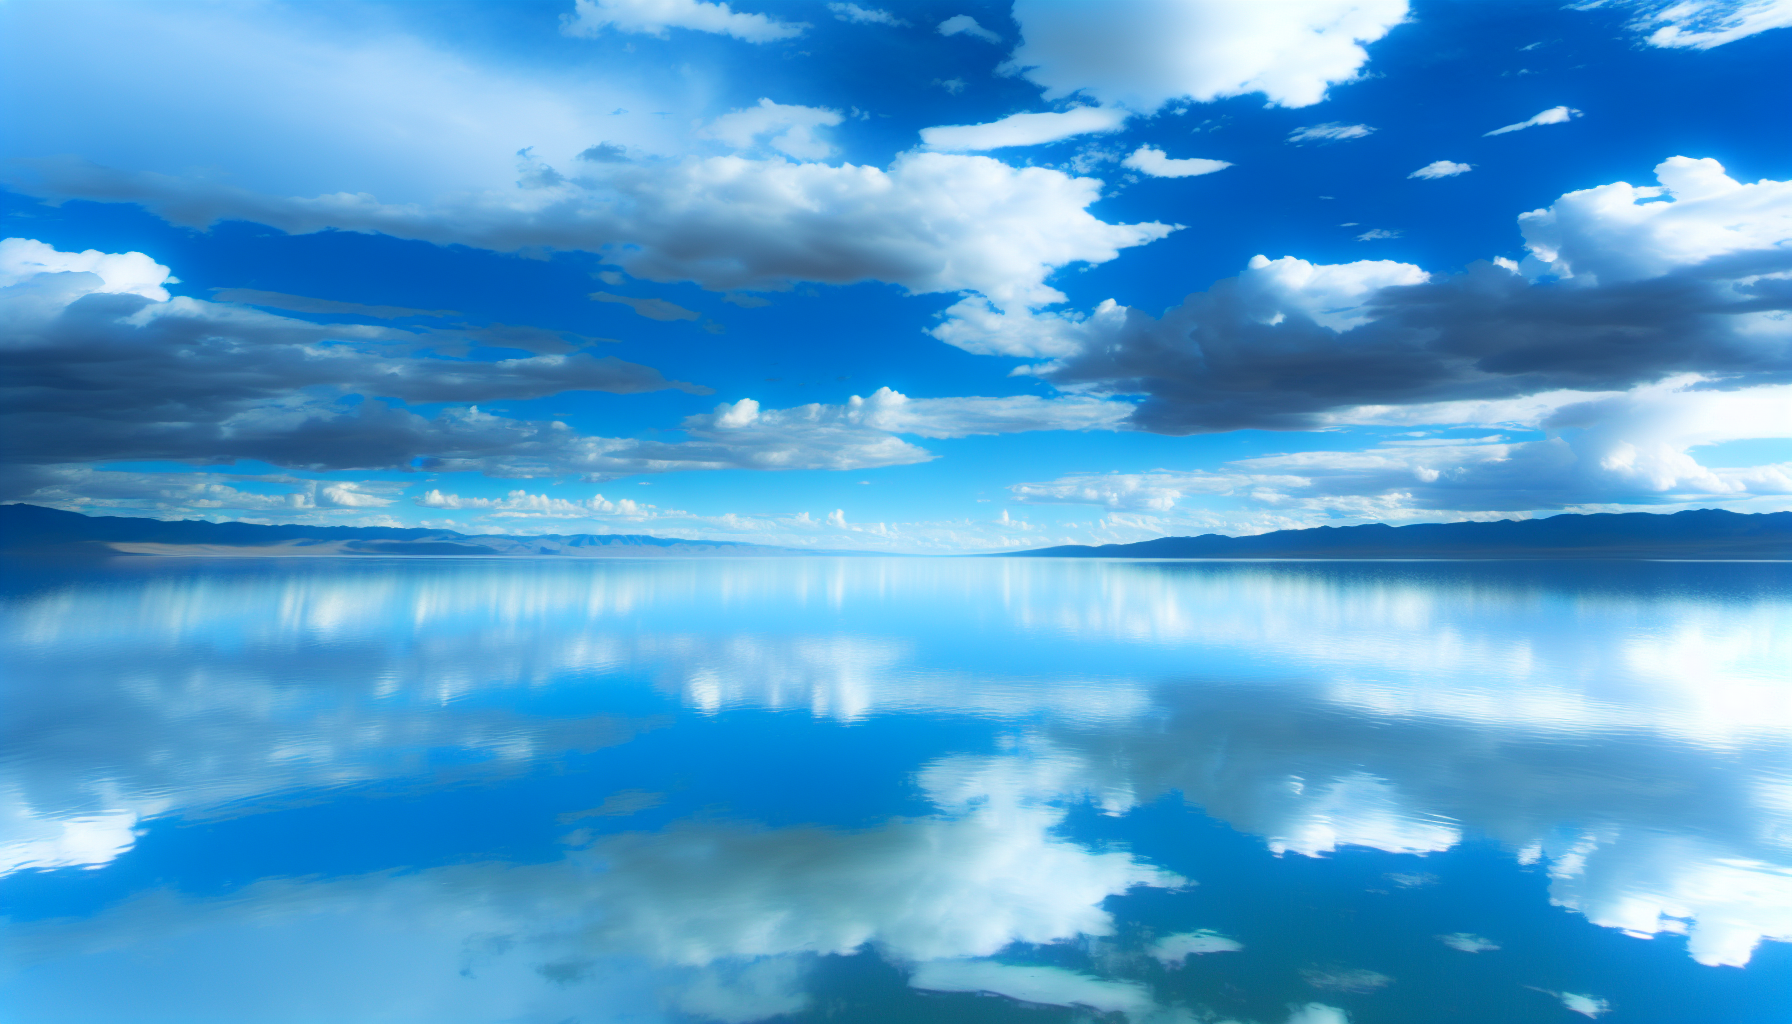 Calm lake reflecting the sky, representing inner peace